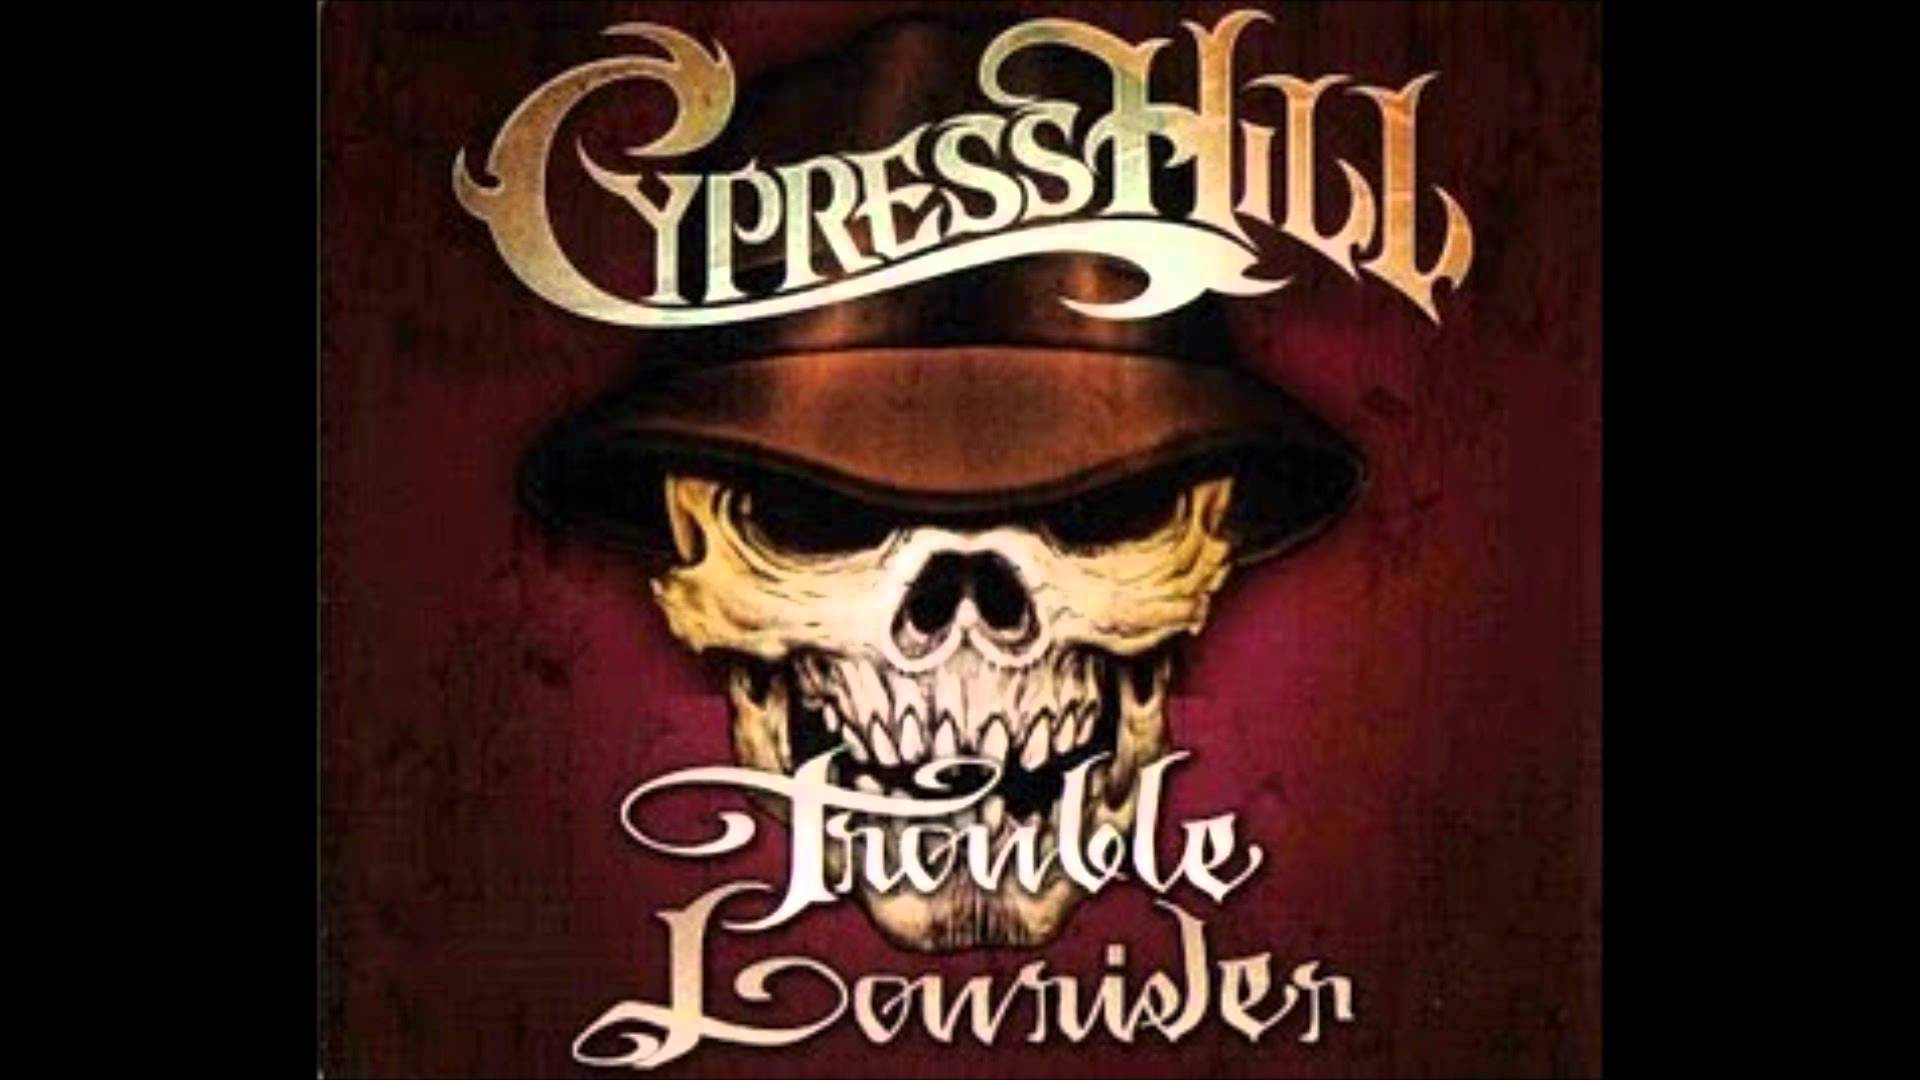 Cypress Hill - Lowrider(BASS BOOSTED) - YouTube